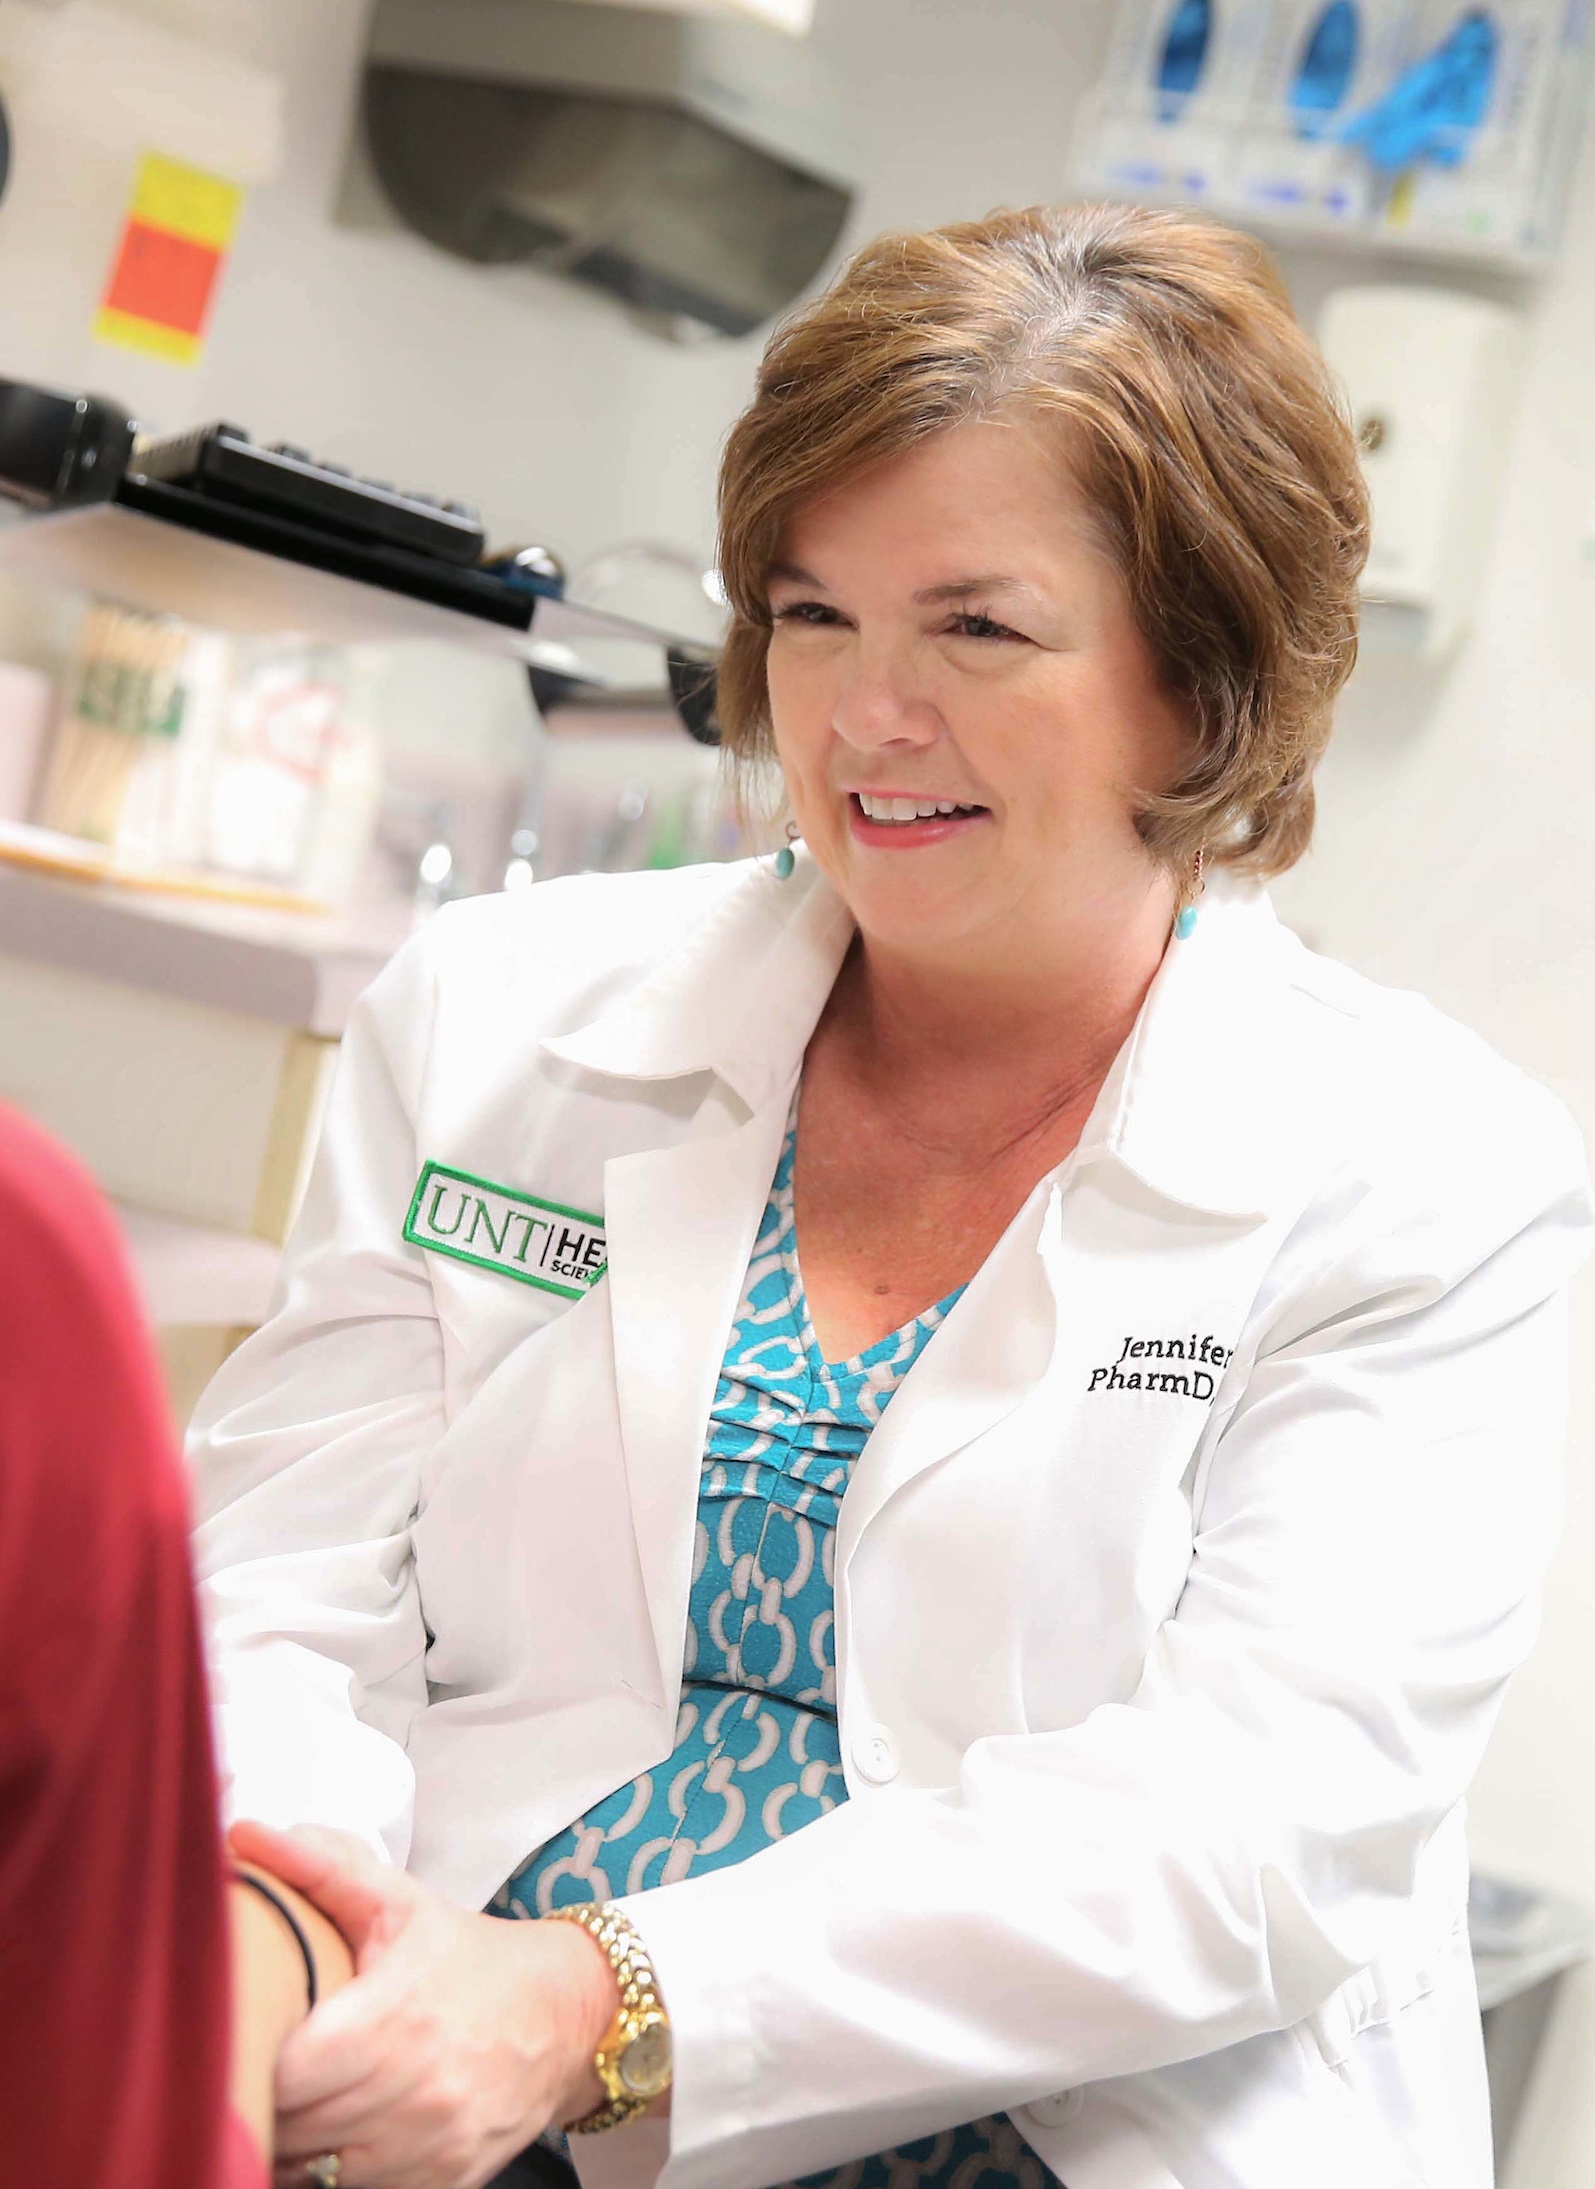 Dr. Jennifer Fix Is The Pharmacist Running The Hepatitis C Clinic At Unthsc.